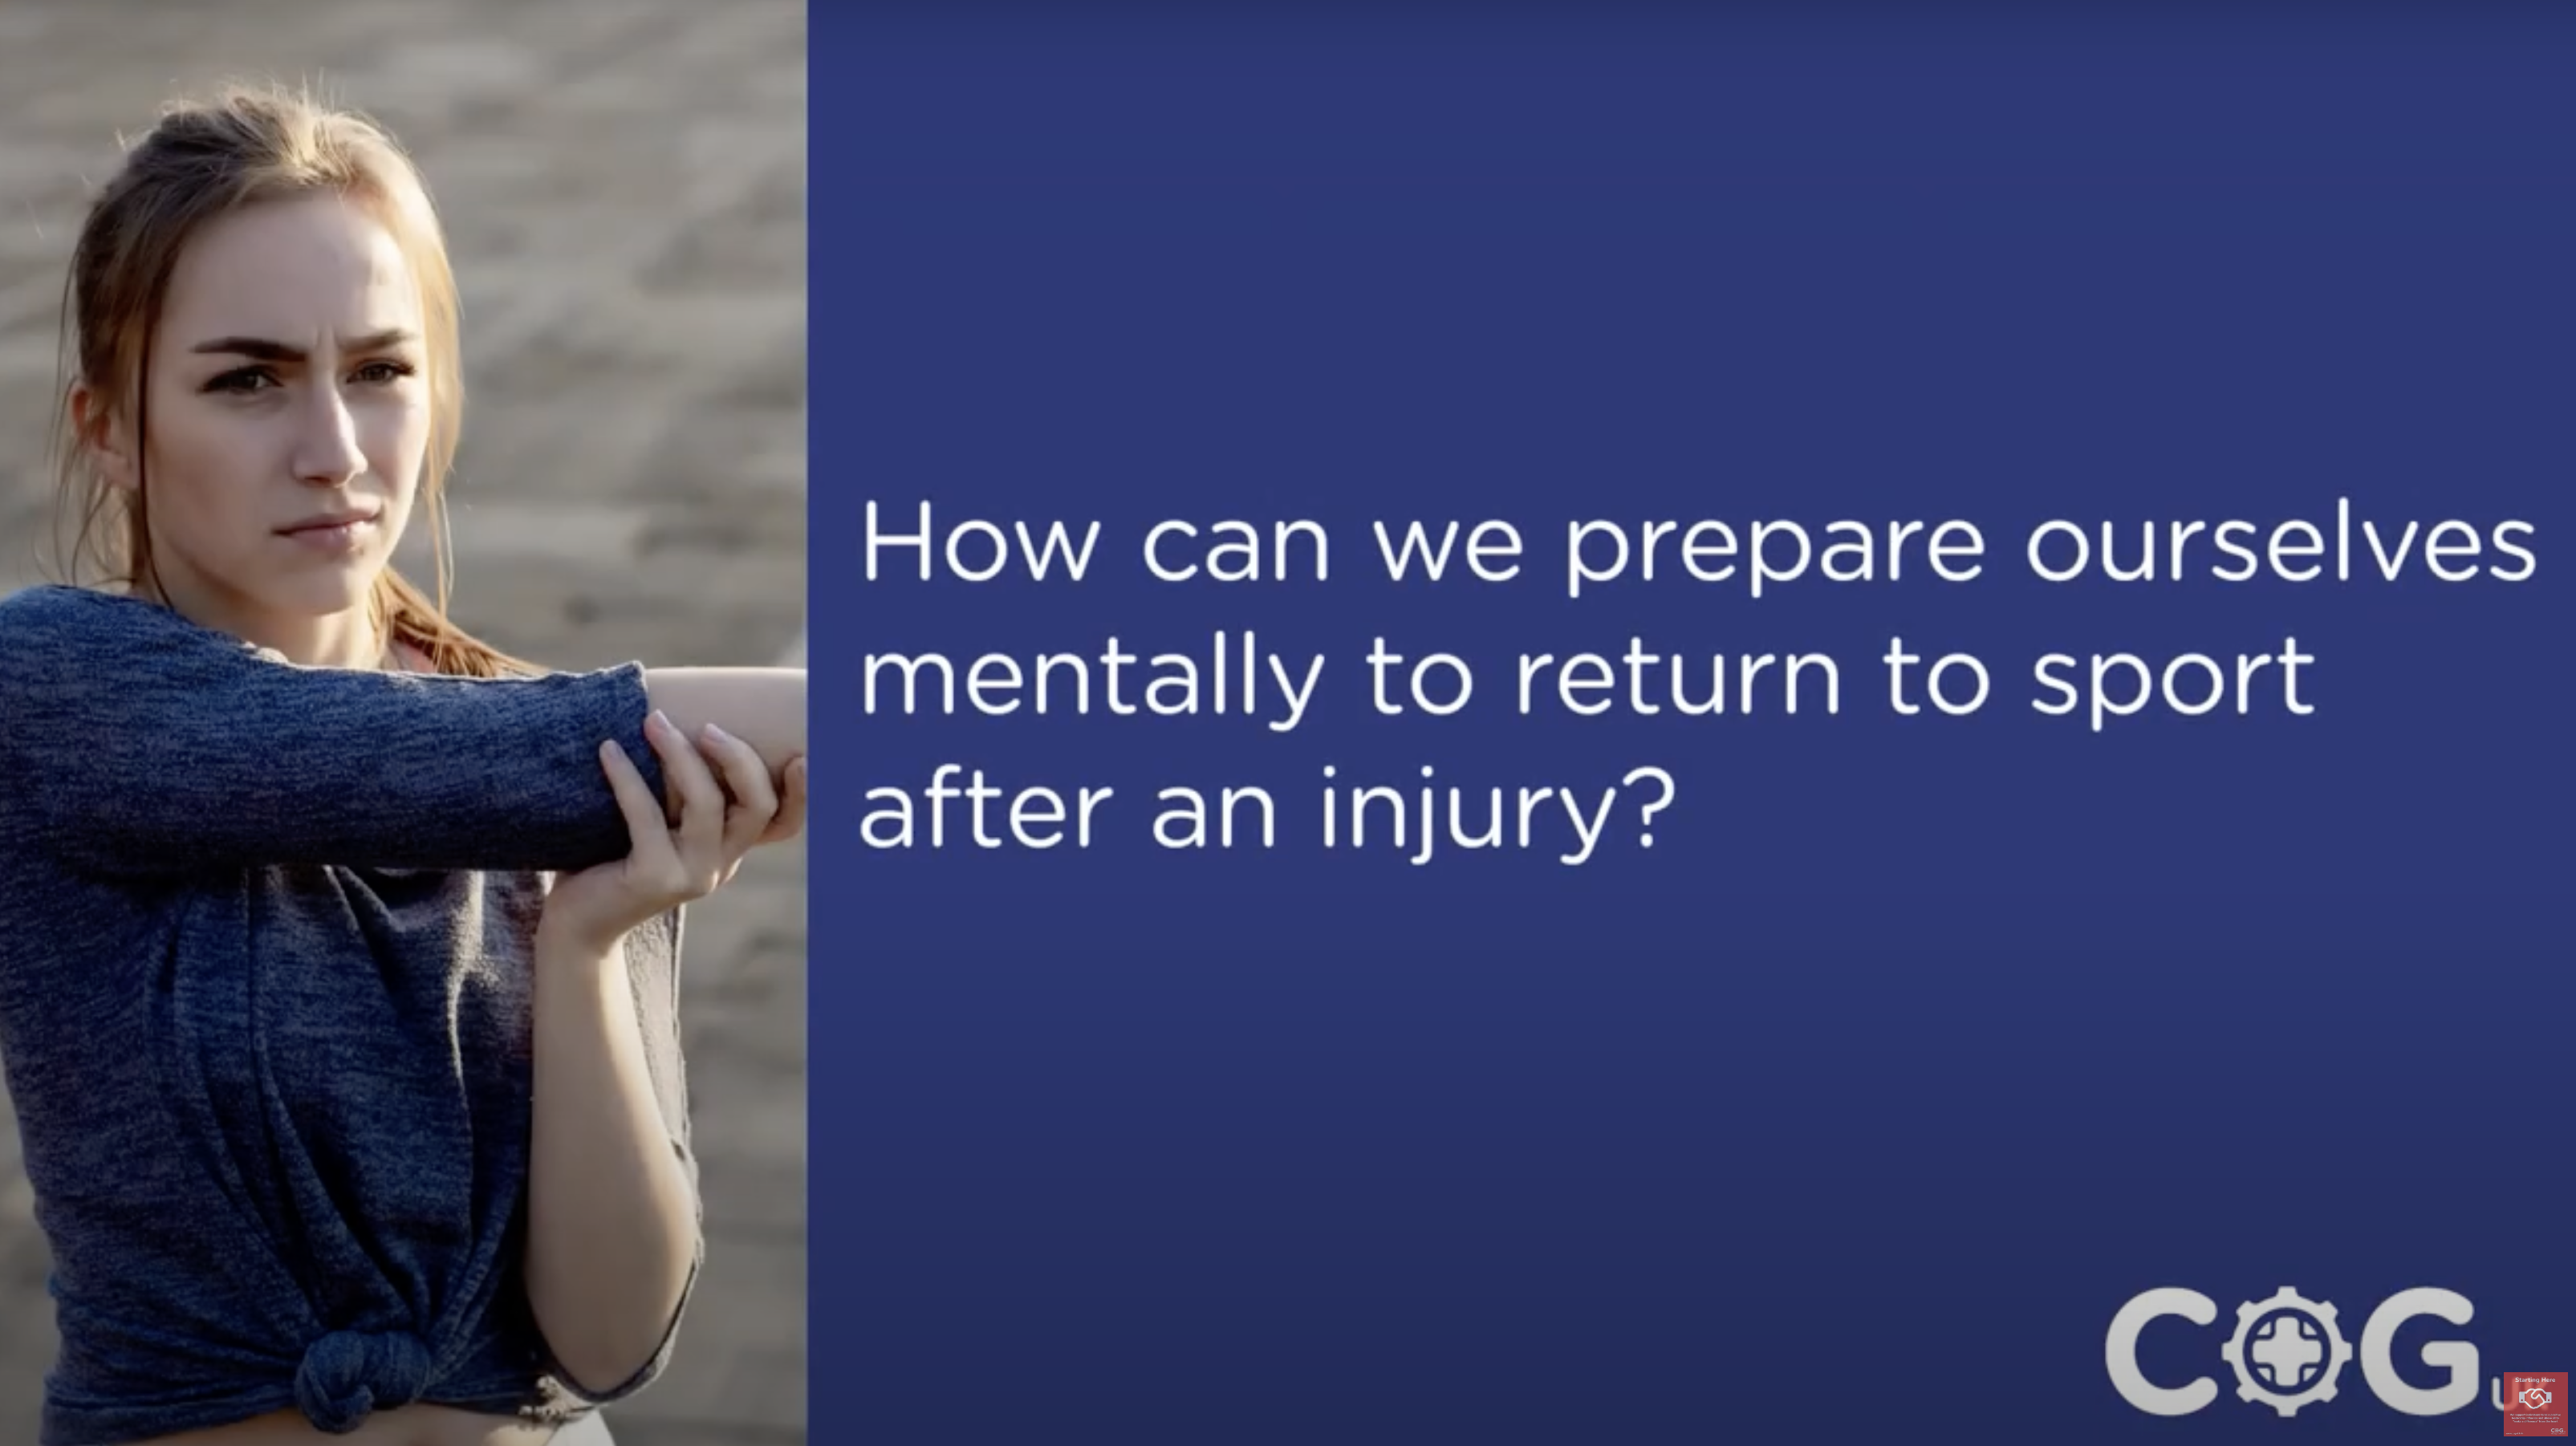 Sports Injury Prevention Q&A: How Can You Prepare Yourself Mentally To Return To Sport After Injury?